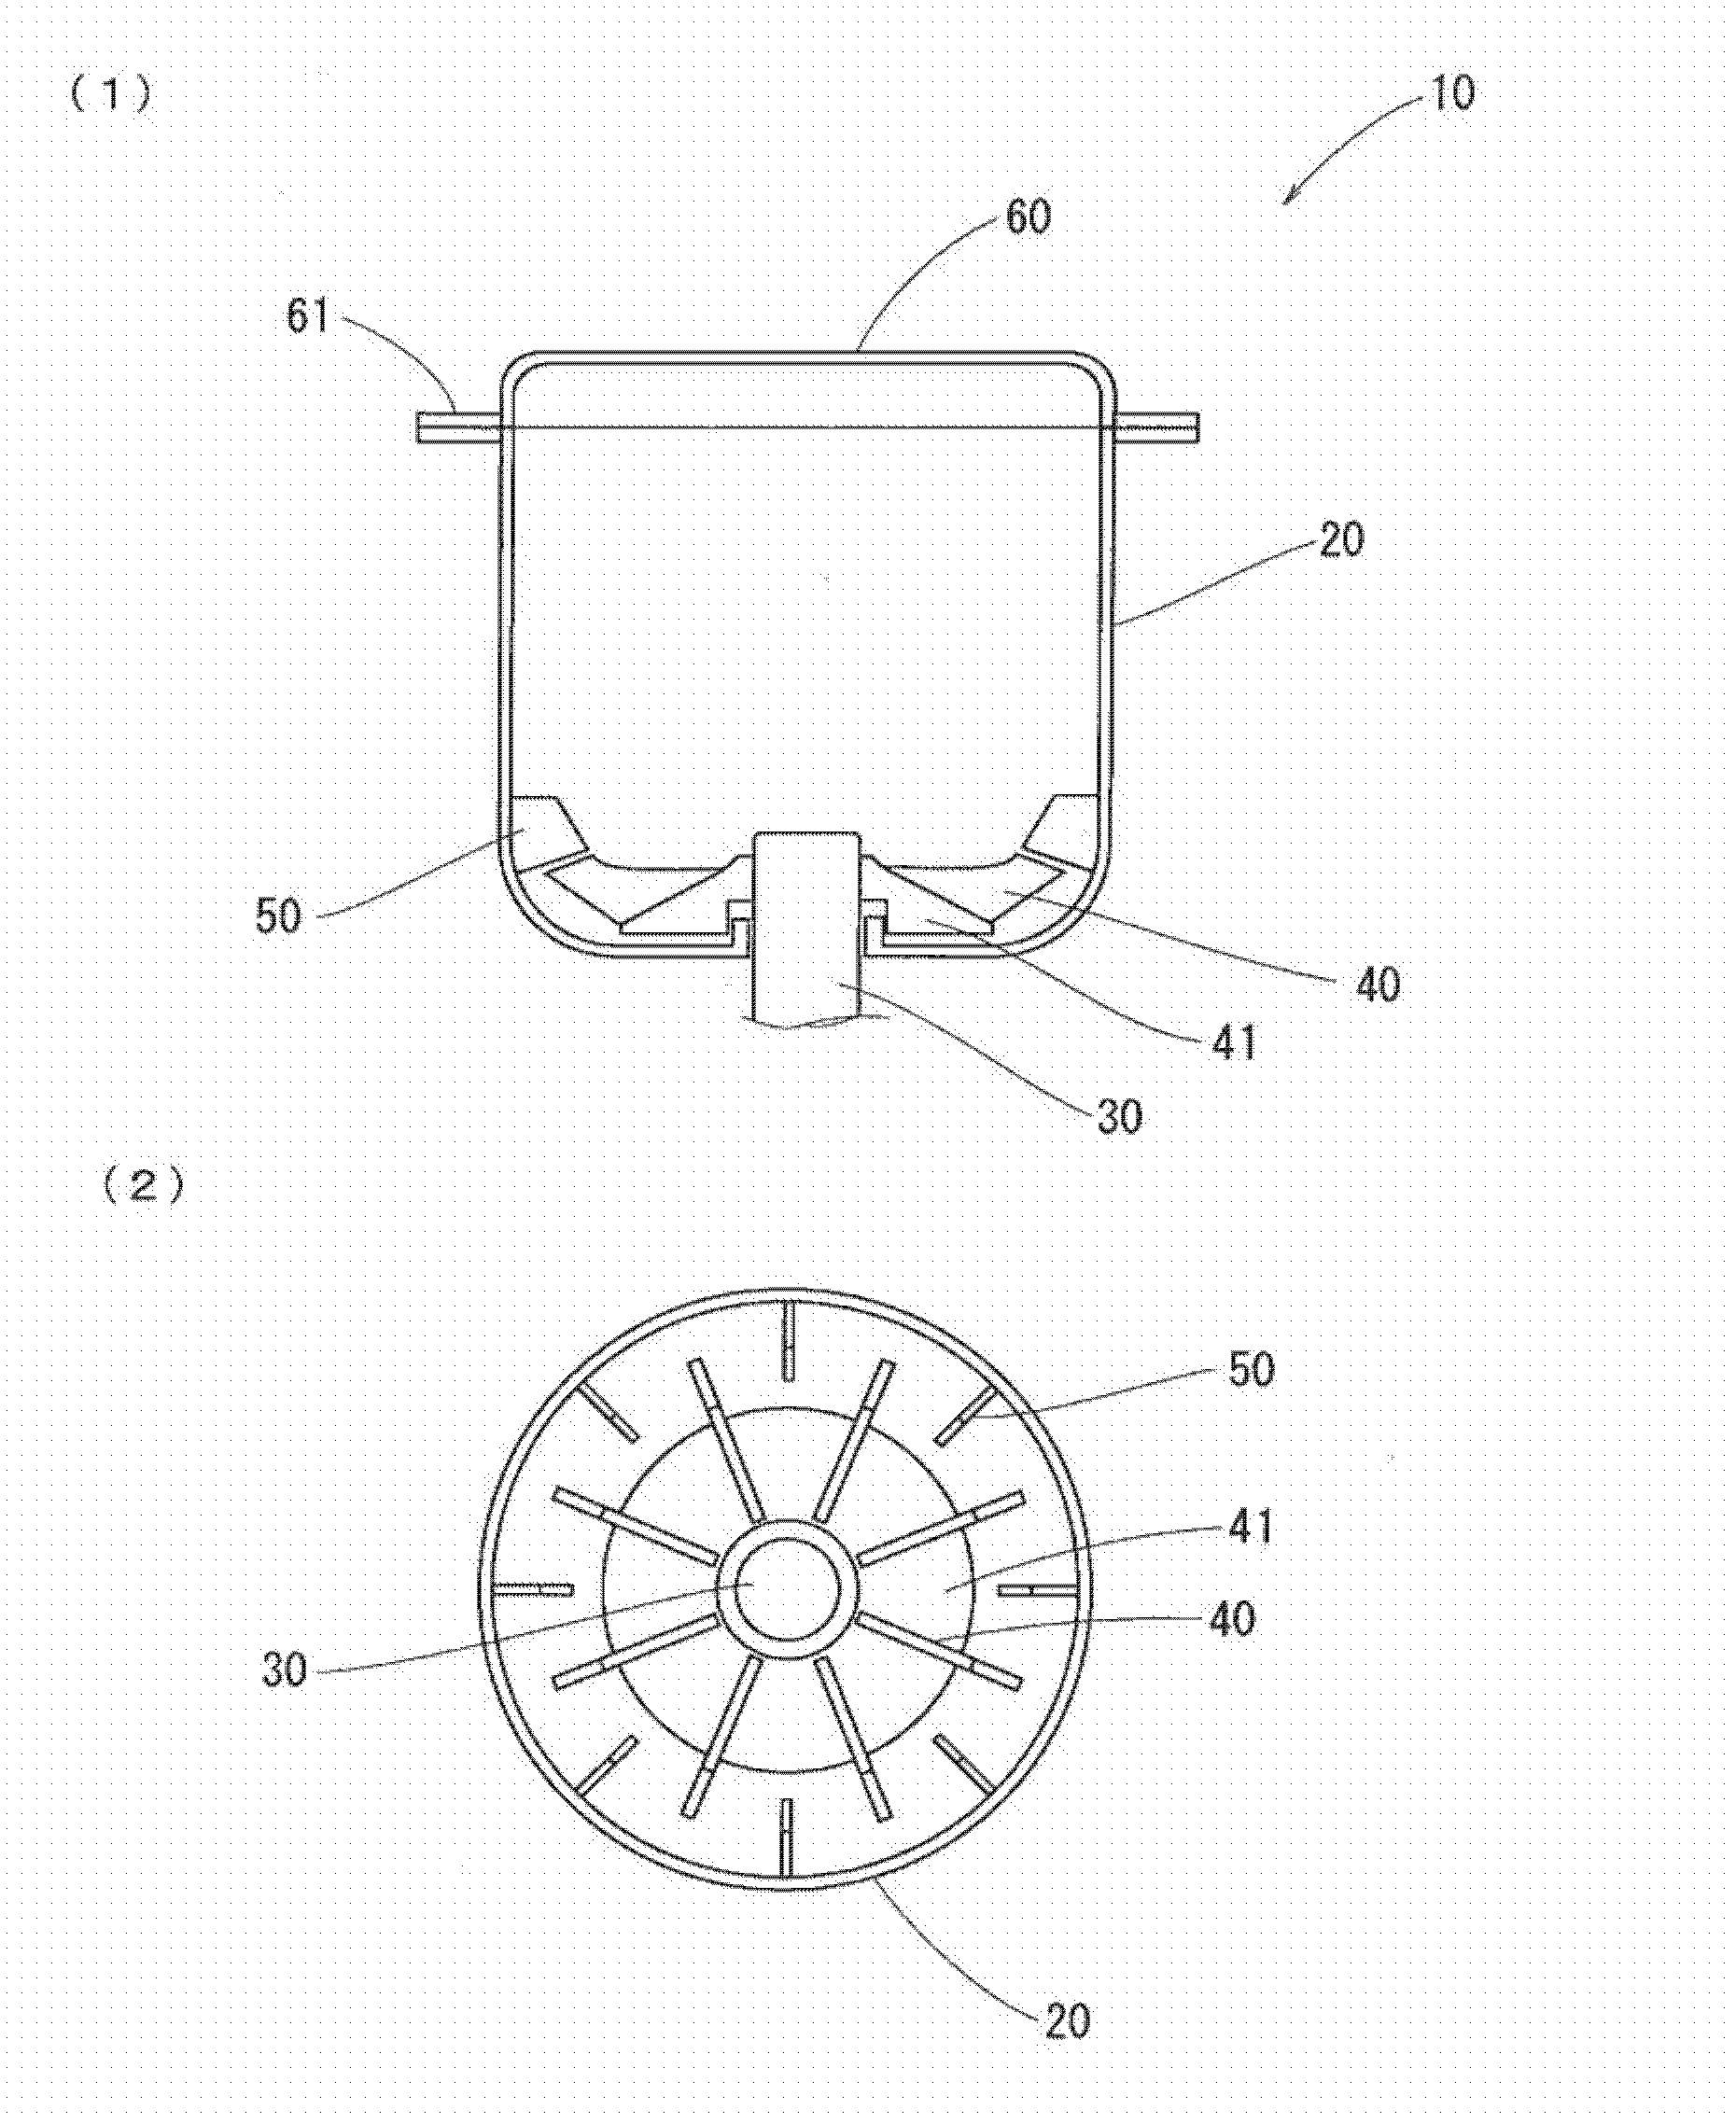 Processing device